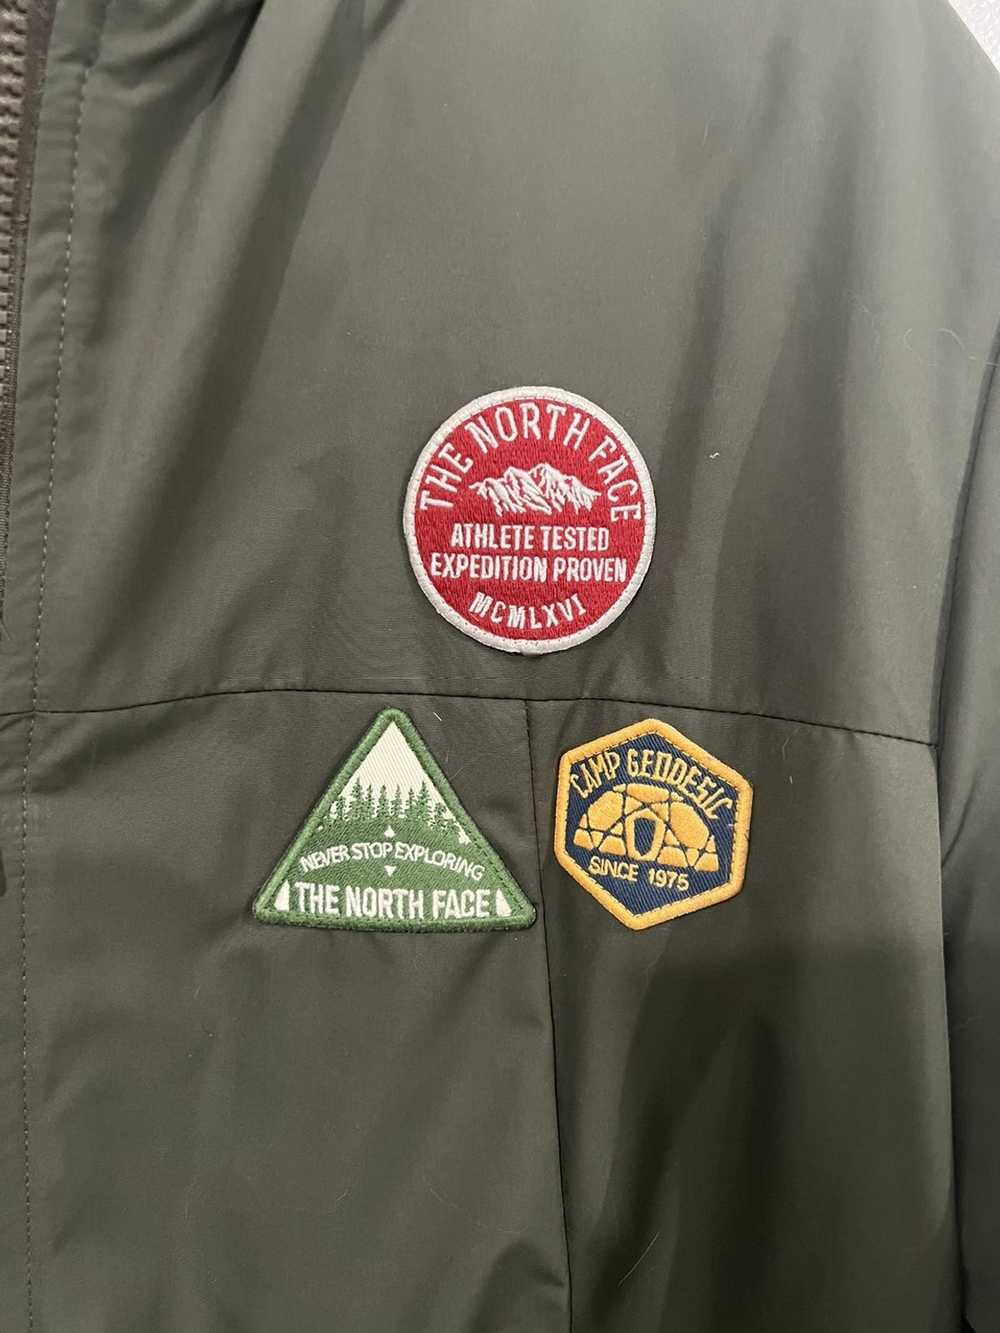 The North Face The North Face Jacket with patches - image 2